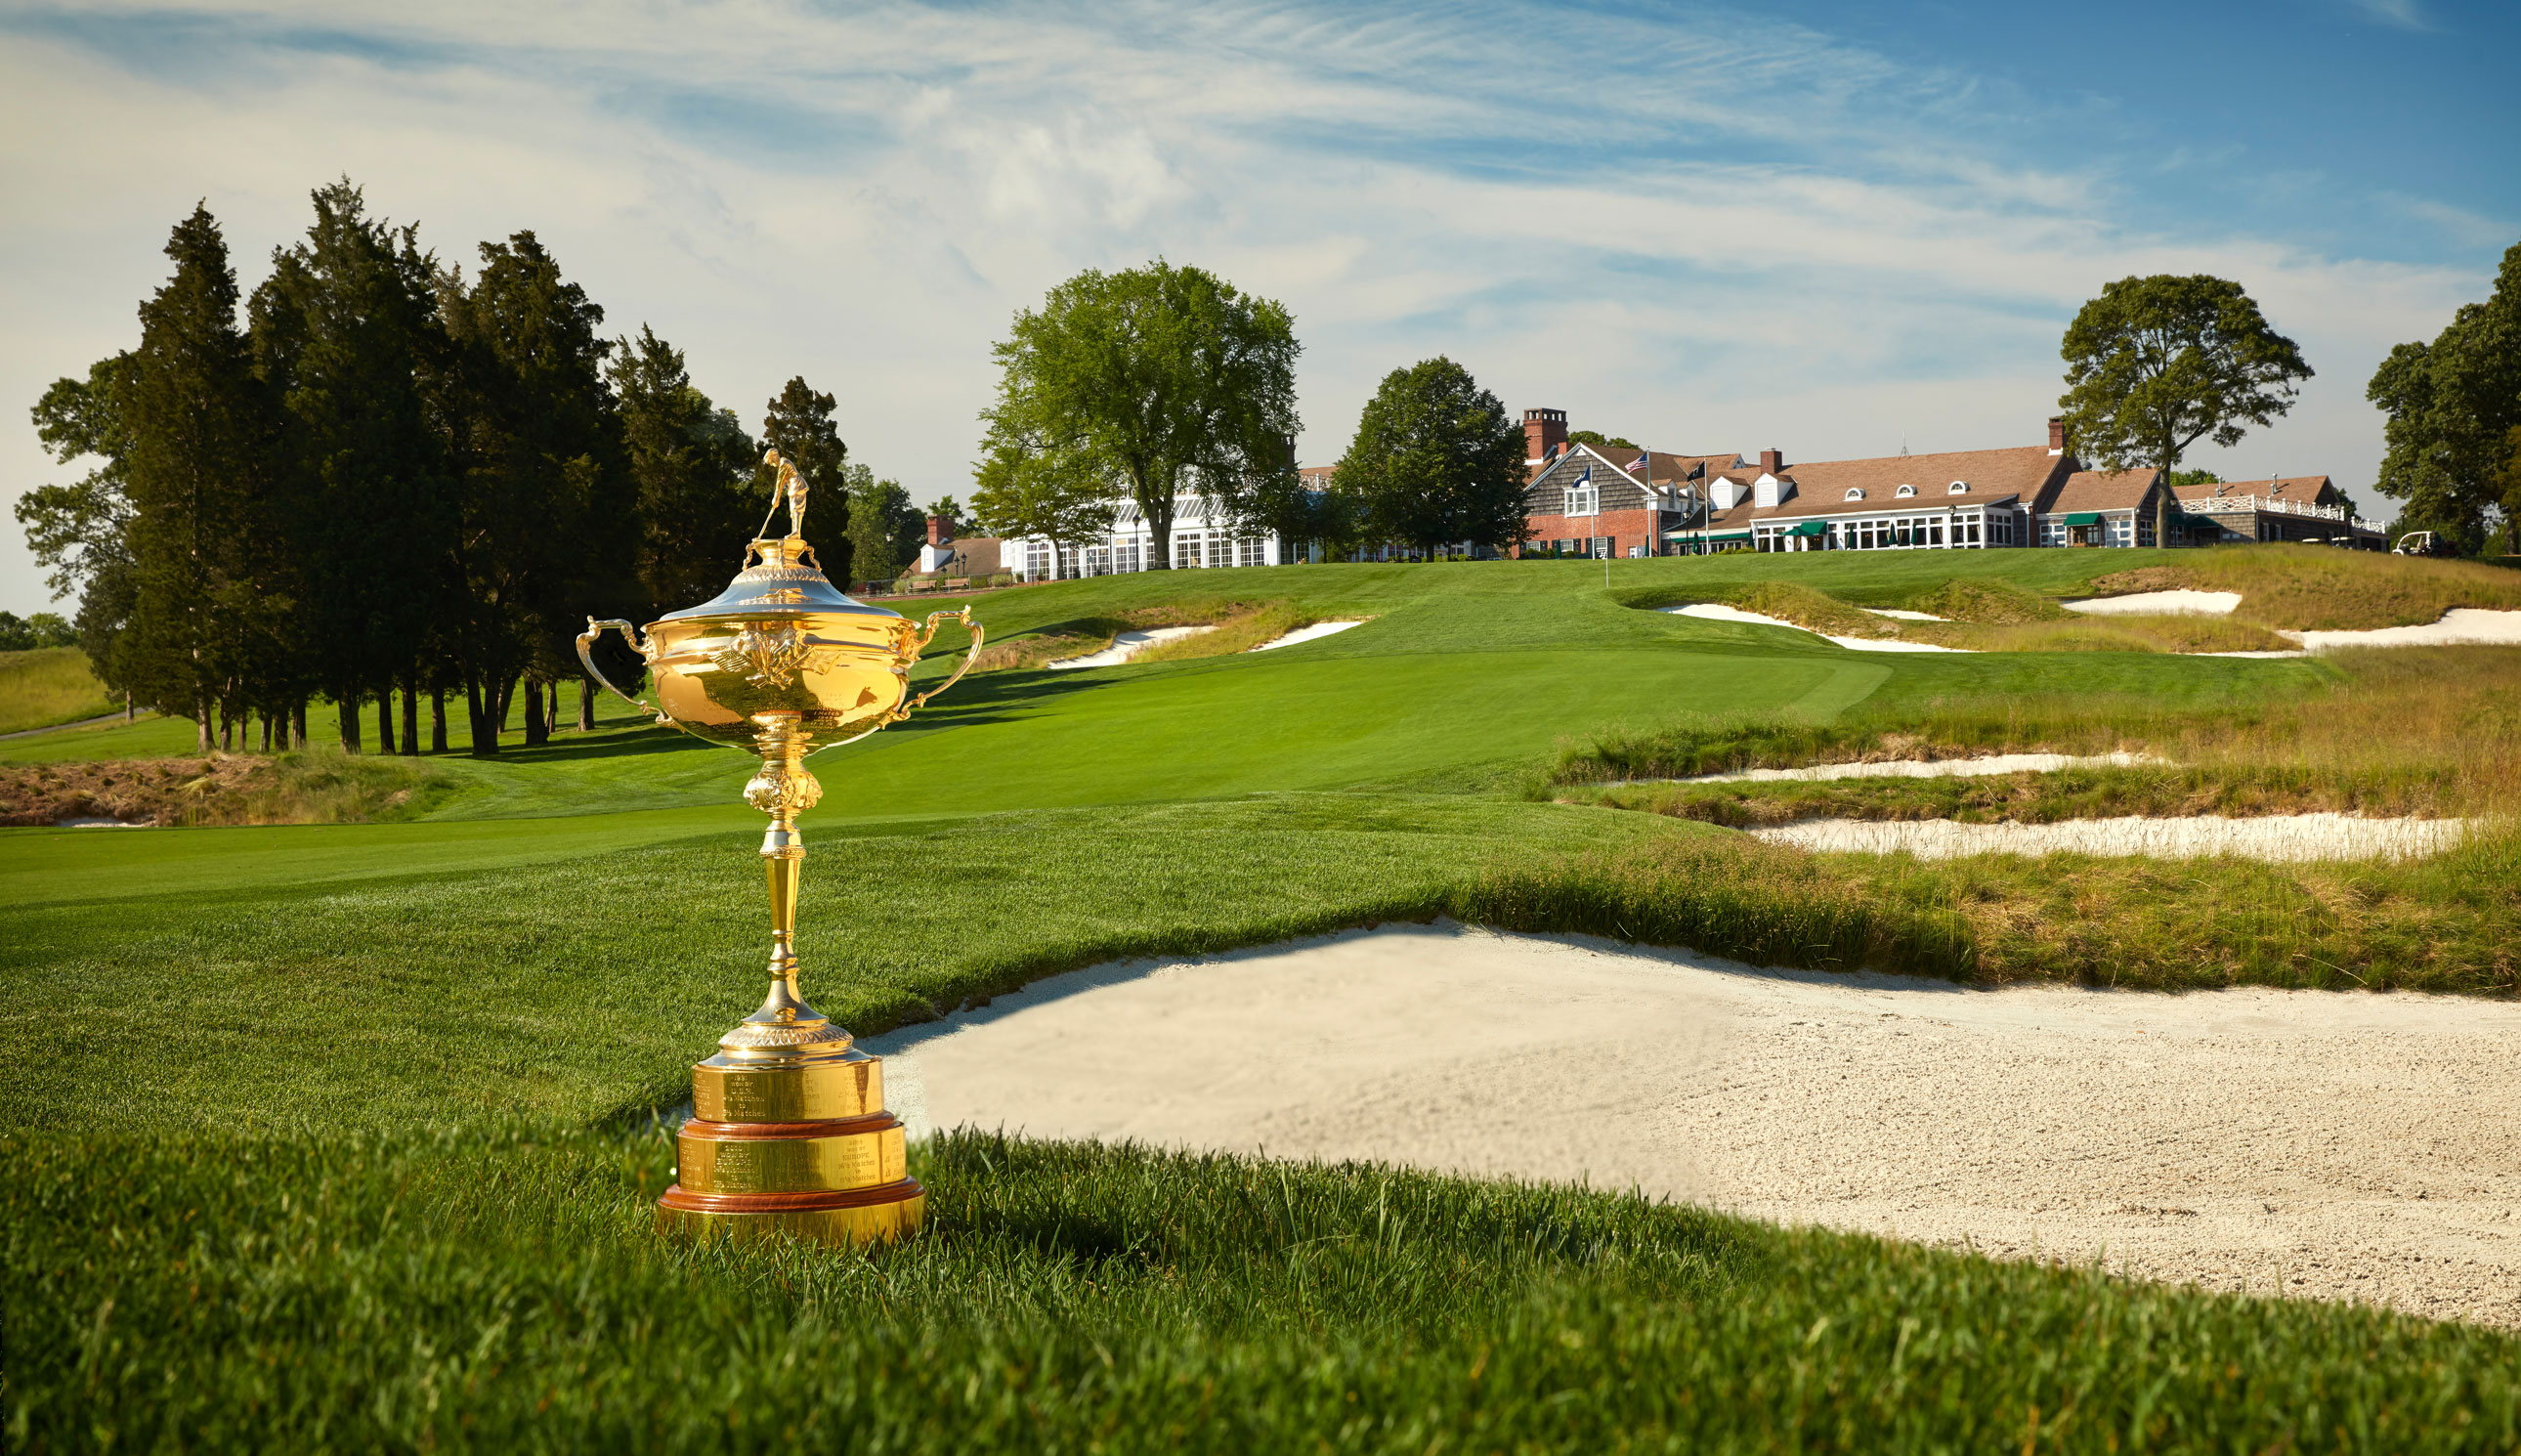 Where Is The Ryder Cup In 2025? Next Ryder Cup Location Confirmed